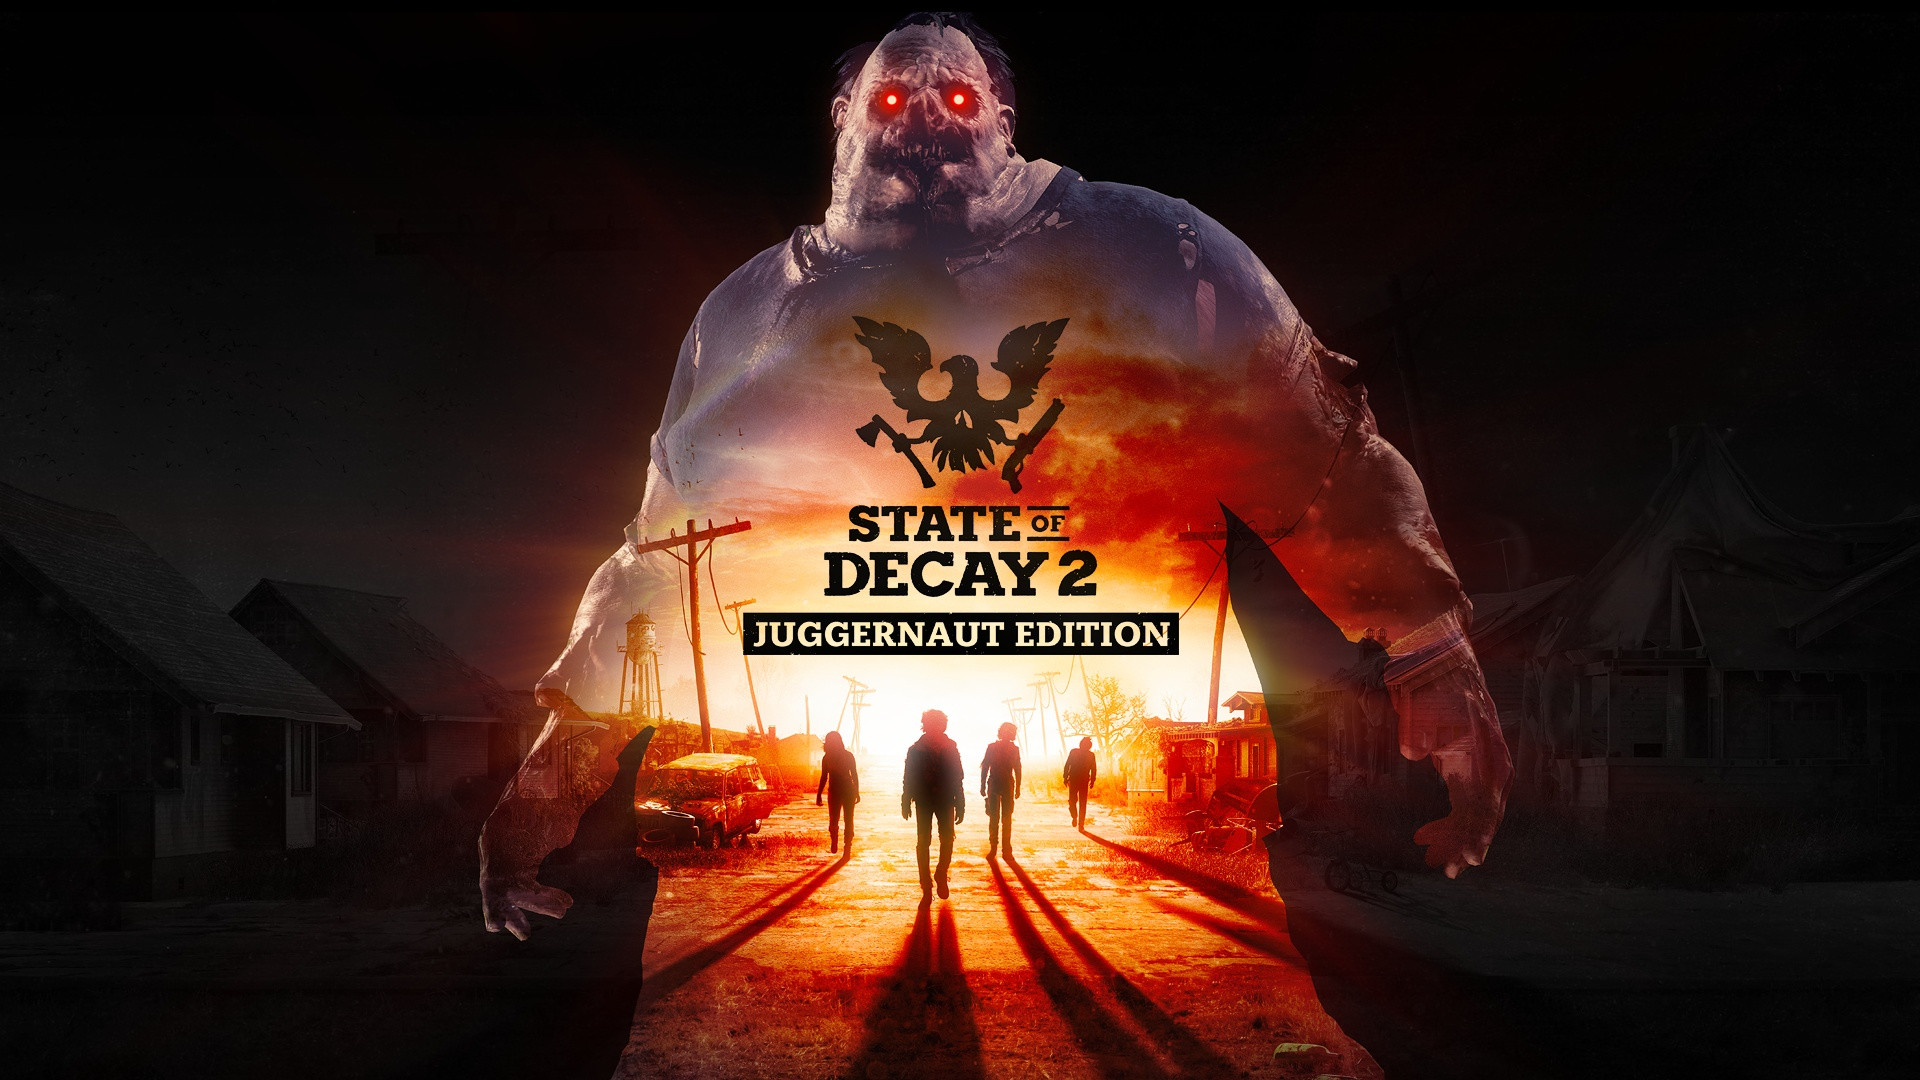 state of decay 2 v1.02 trainer